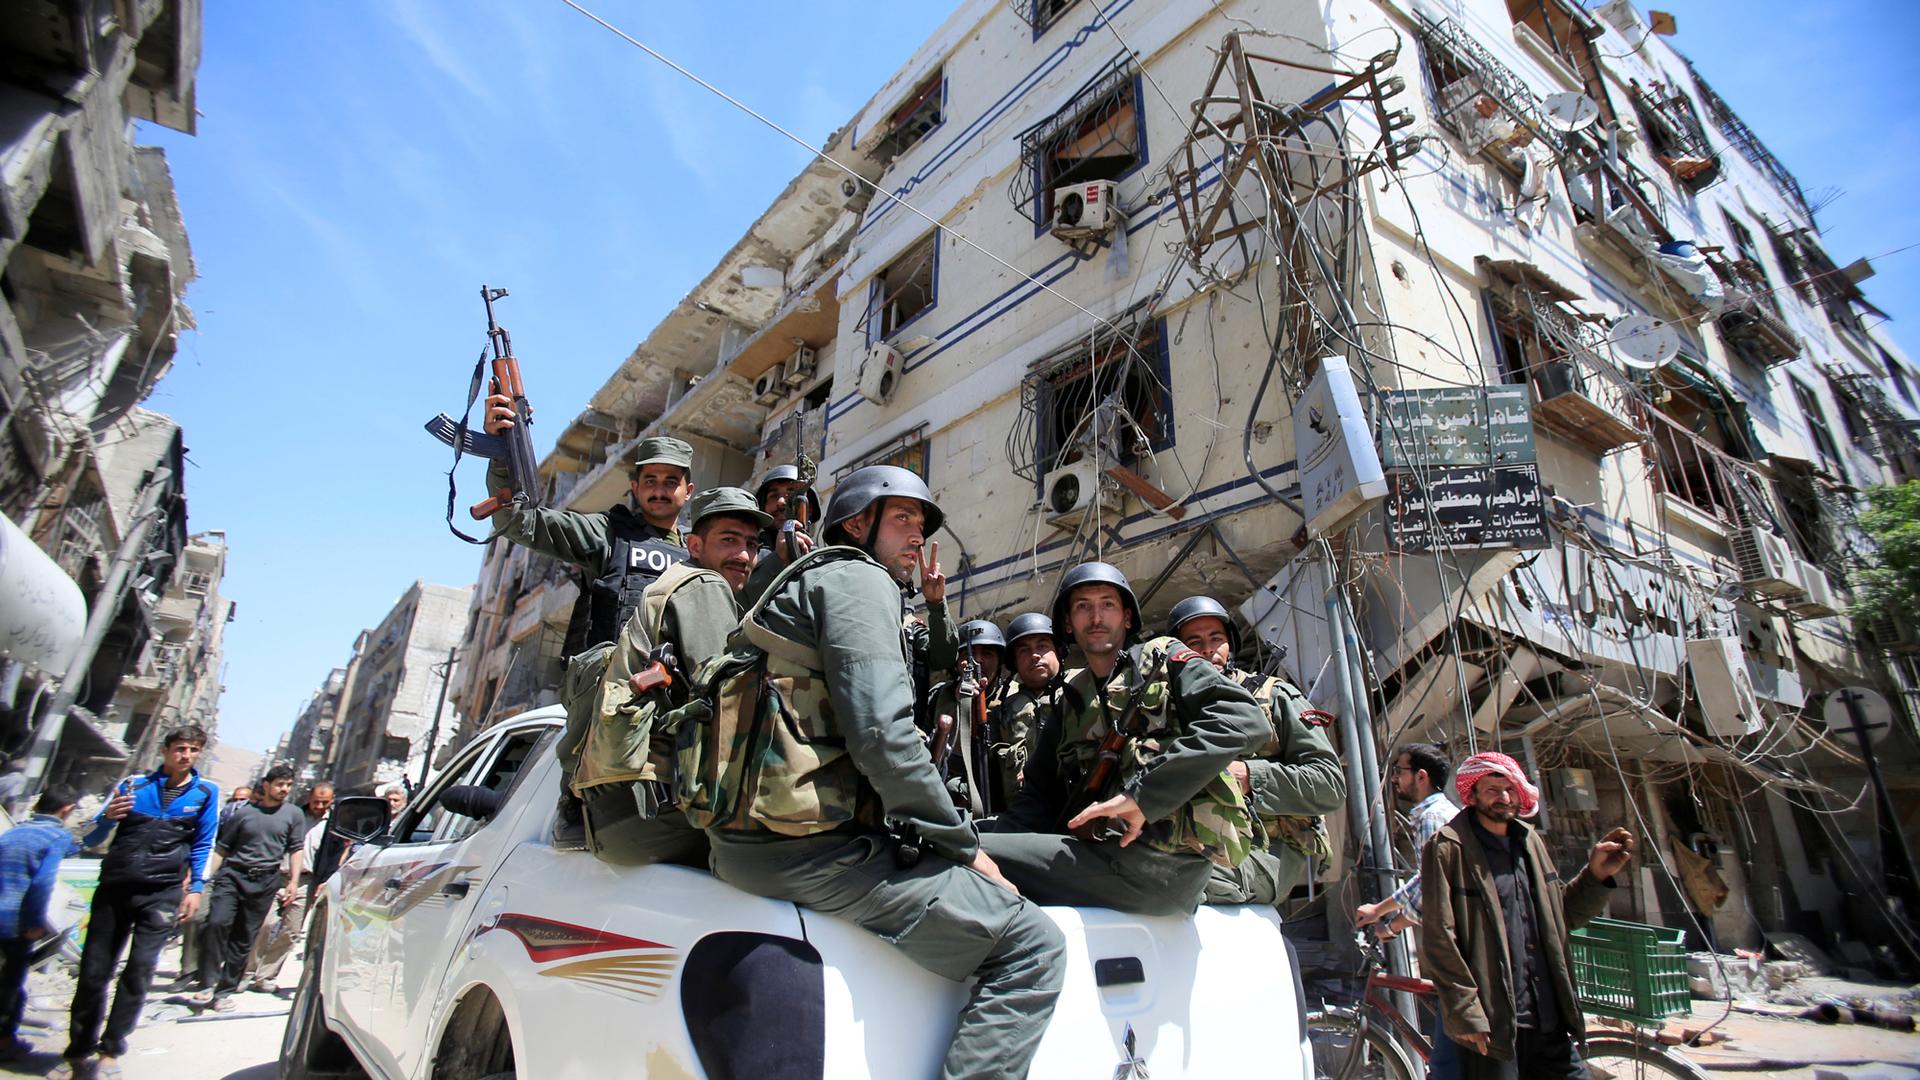 Syrian police hold weapons while they ride in the bed of a pickup truck in Doma.